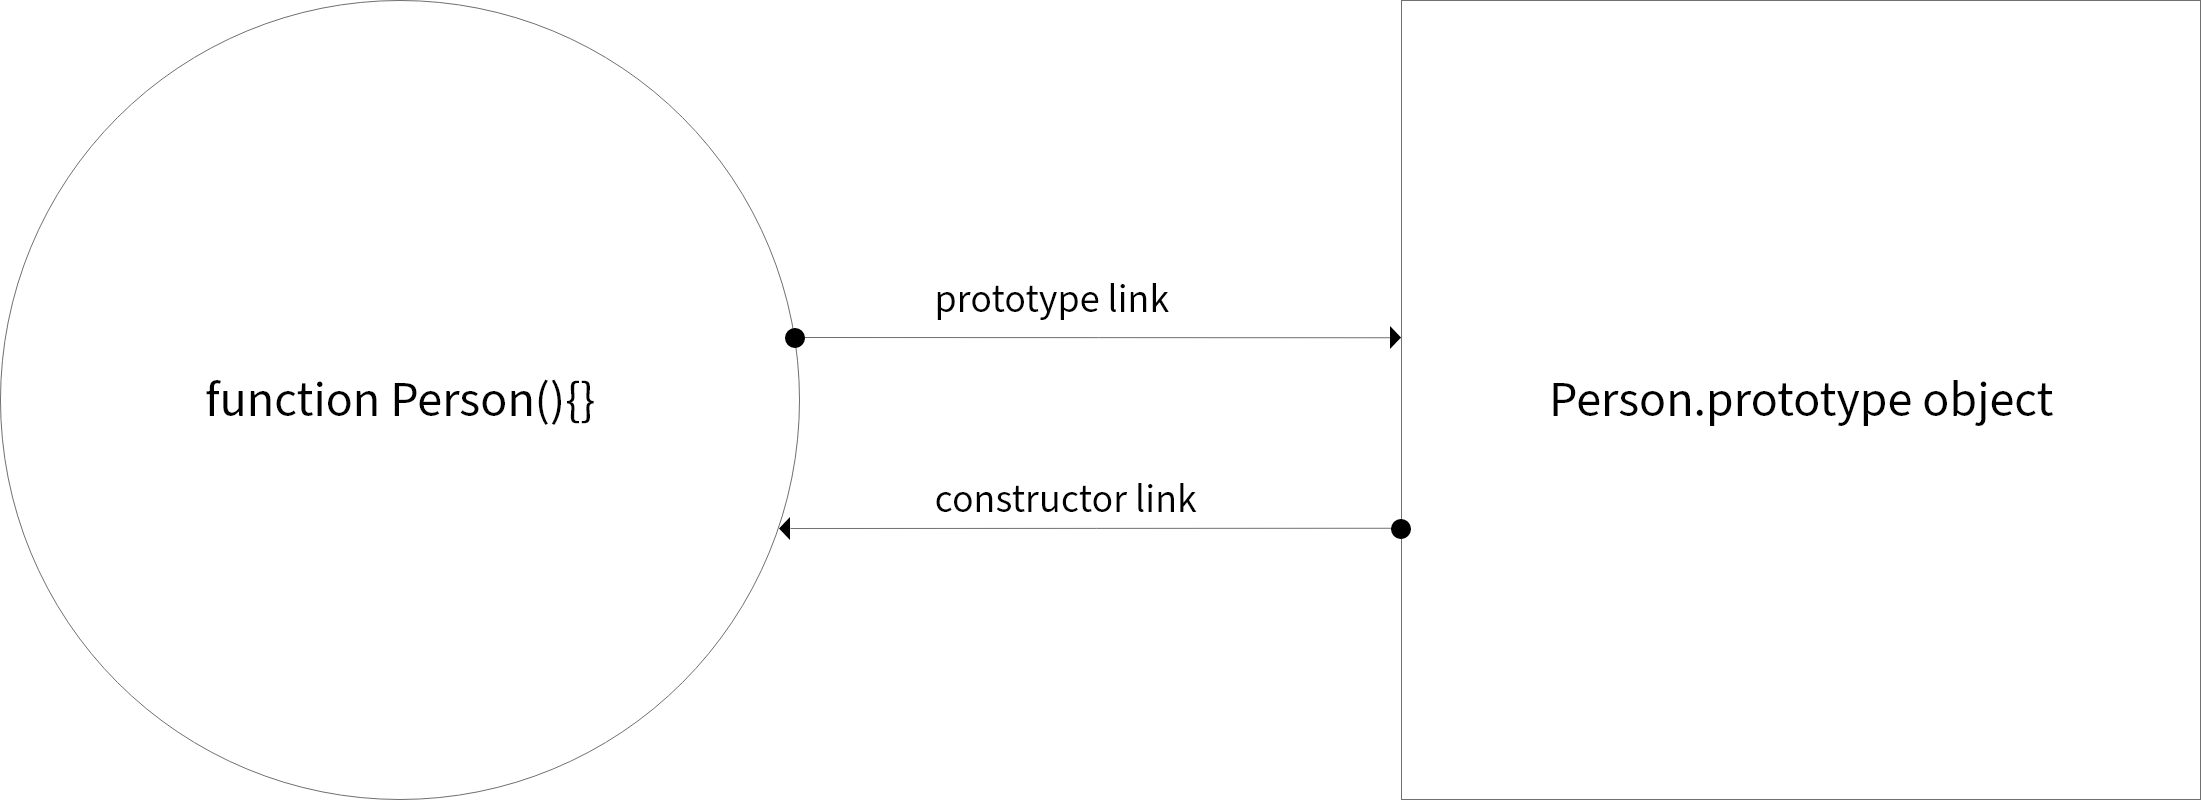 A constructor (function Peron(){}) sends a prototype link to its prototype object (Person.prototype object), which returns a constructor link back.